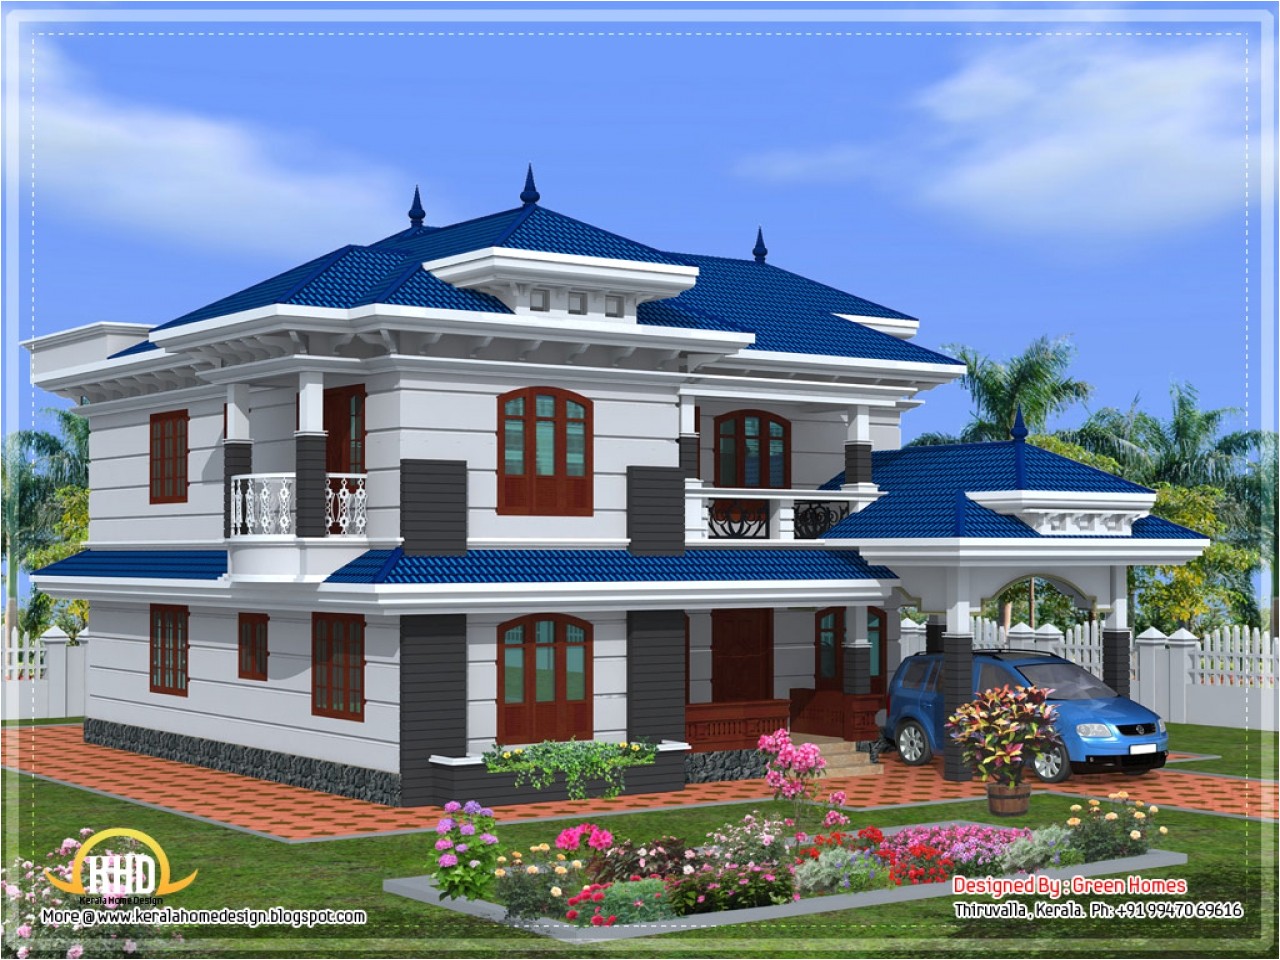 172a5ae10cdfba3b beautiful house designs in kerala the most beautiful houses ever